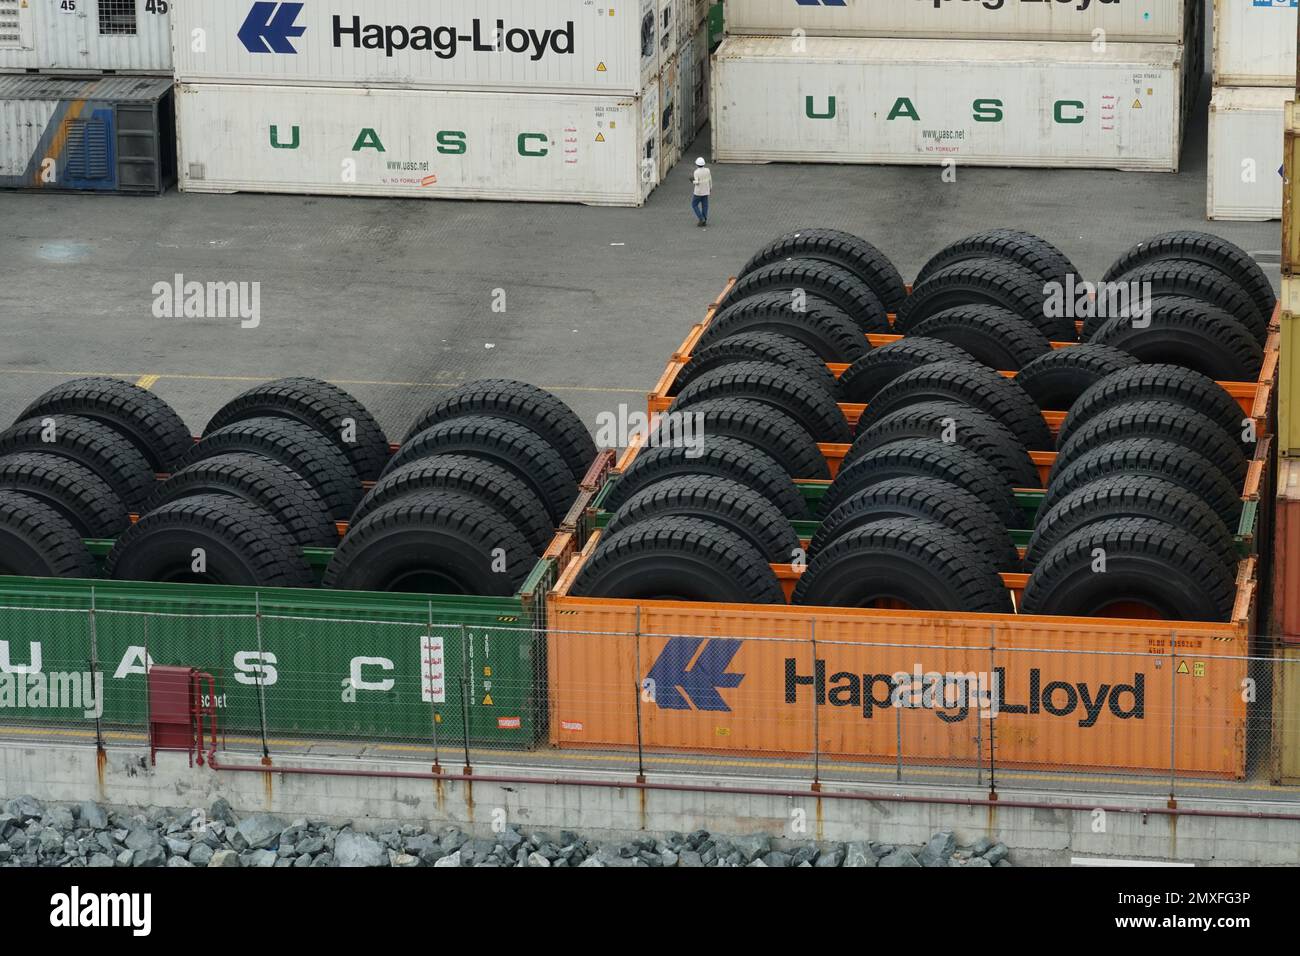 Orange and green containers loaded with big tires for heavy goods lorry or trucks situated on container terminal. Stock Photo